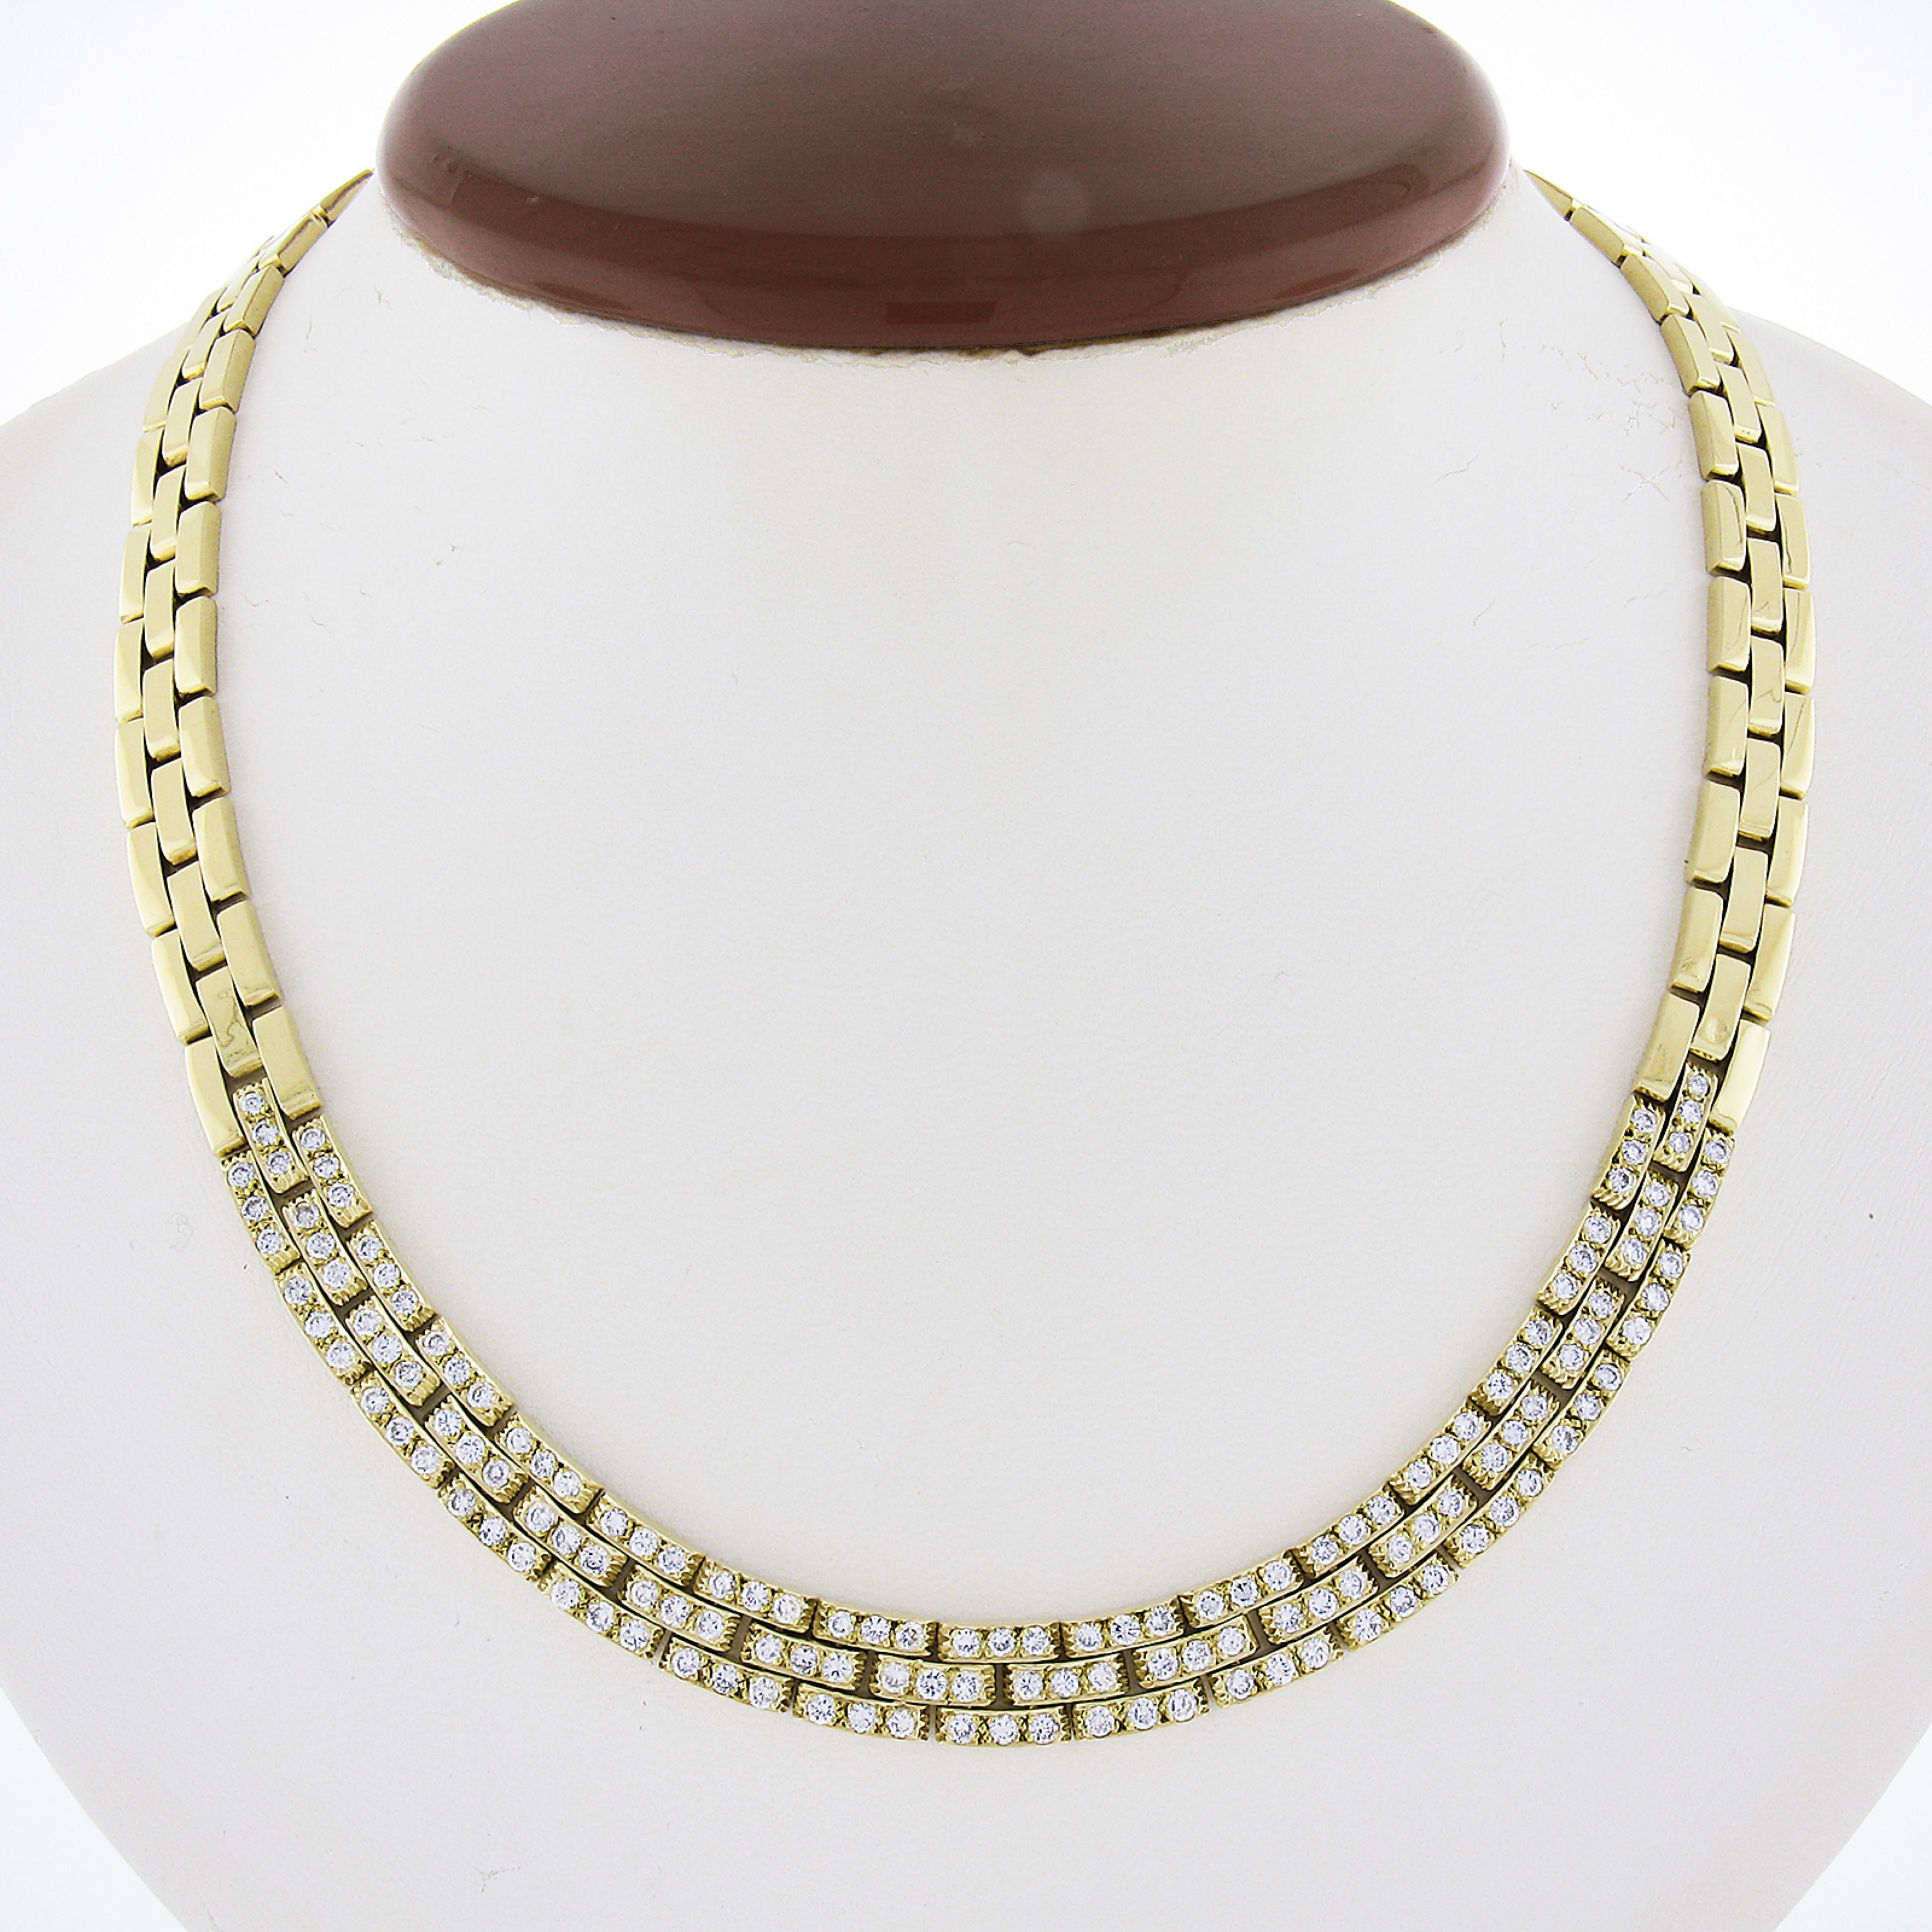 Very solid and well made 18k gold necklace with magnificent hand pave work covering the front of the necklace. 138 perfect diamonds cover the front of the necklace while the rest is polished to show off the luscious 18k yellow gold!